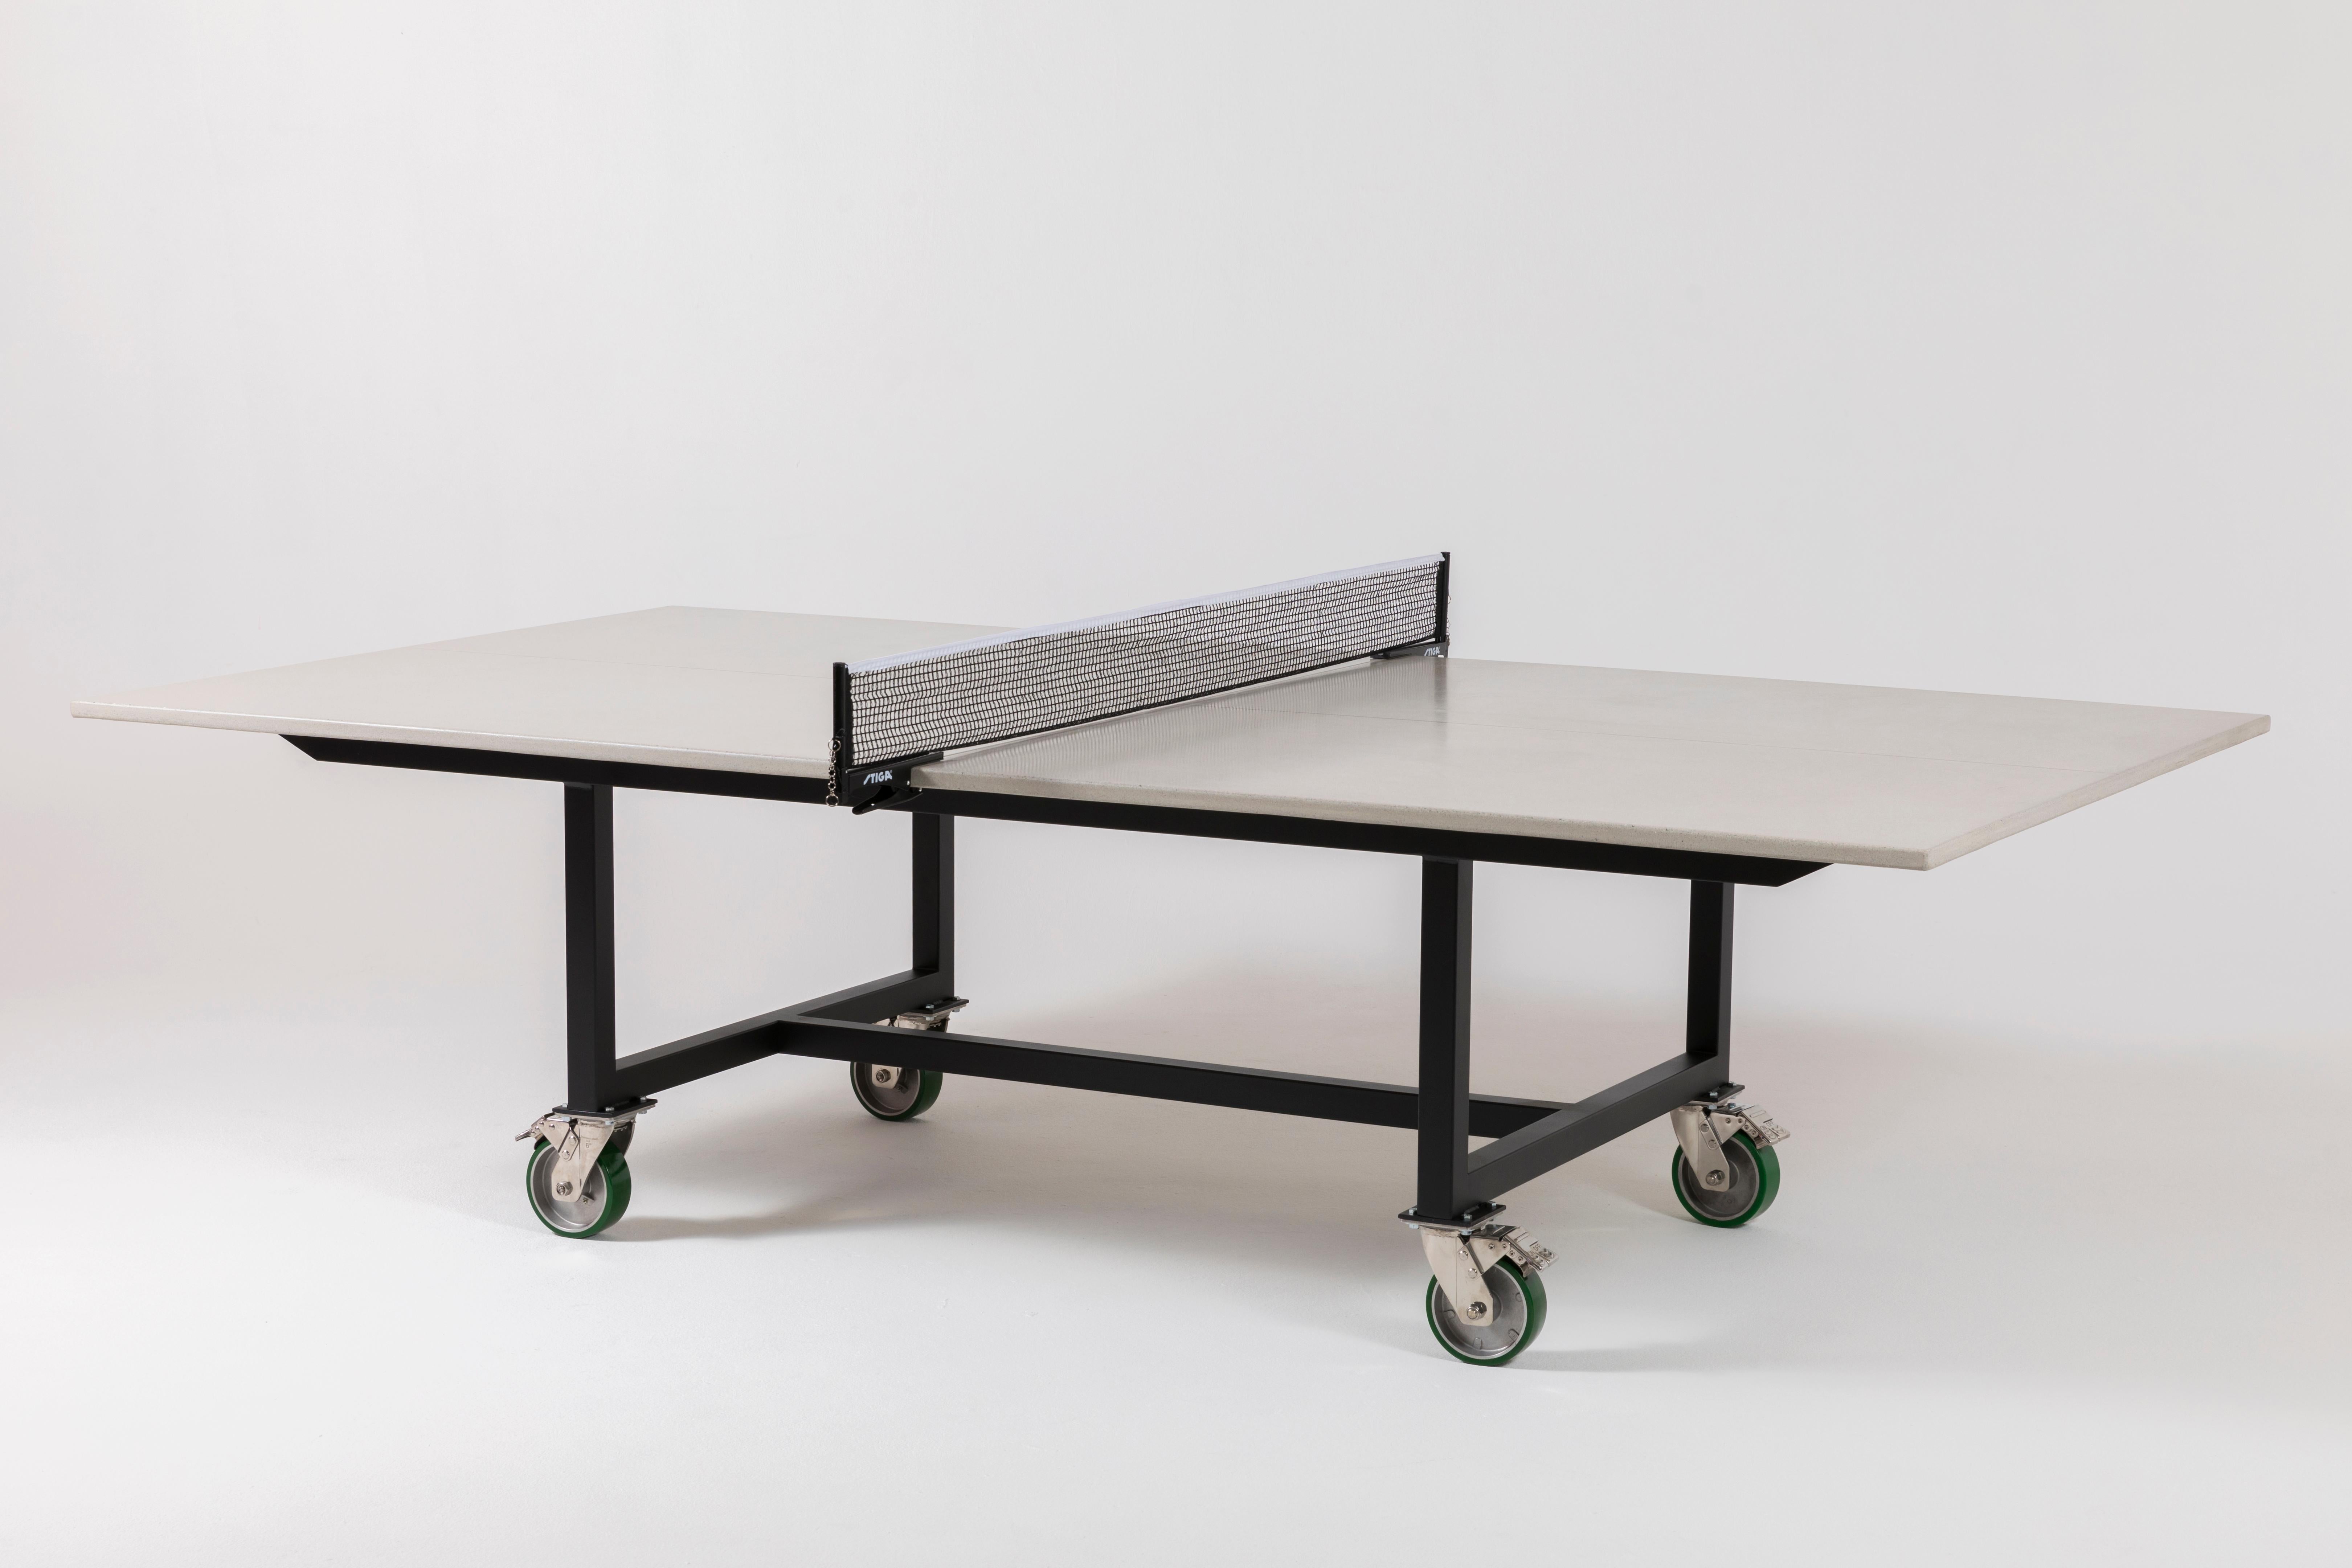 James de Wulf's latest Rolling Ping Pong table boasts a stylish game with a slick, finished concrete playing surface atop a powder coated steel base. The redesigned classic Vue table can move about your play room and outdoor setting on rugged 6